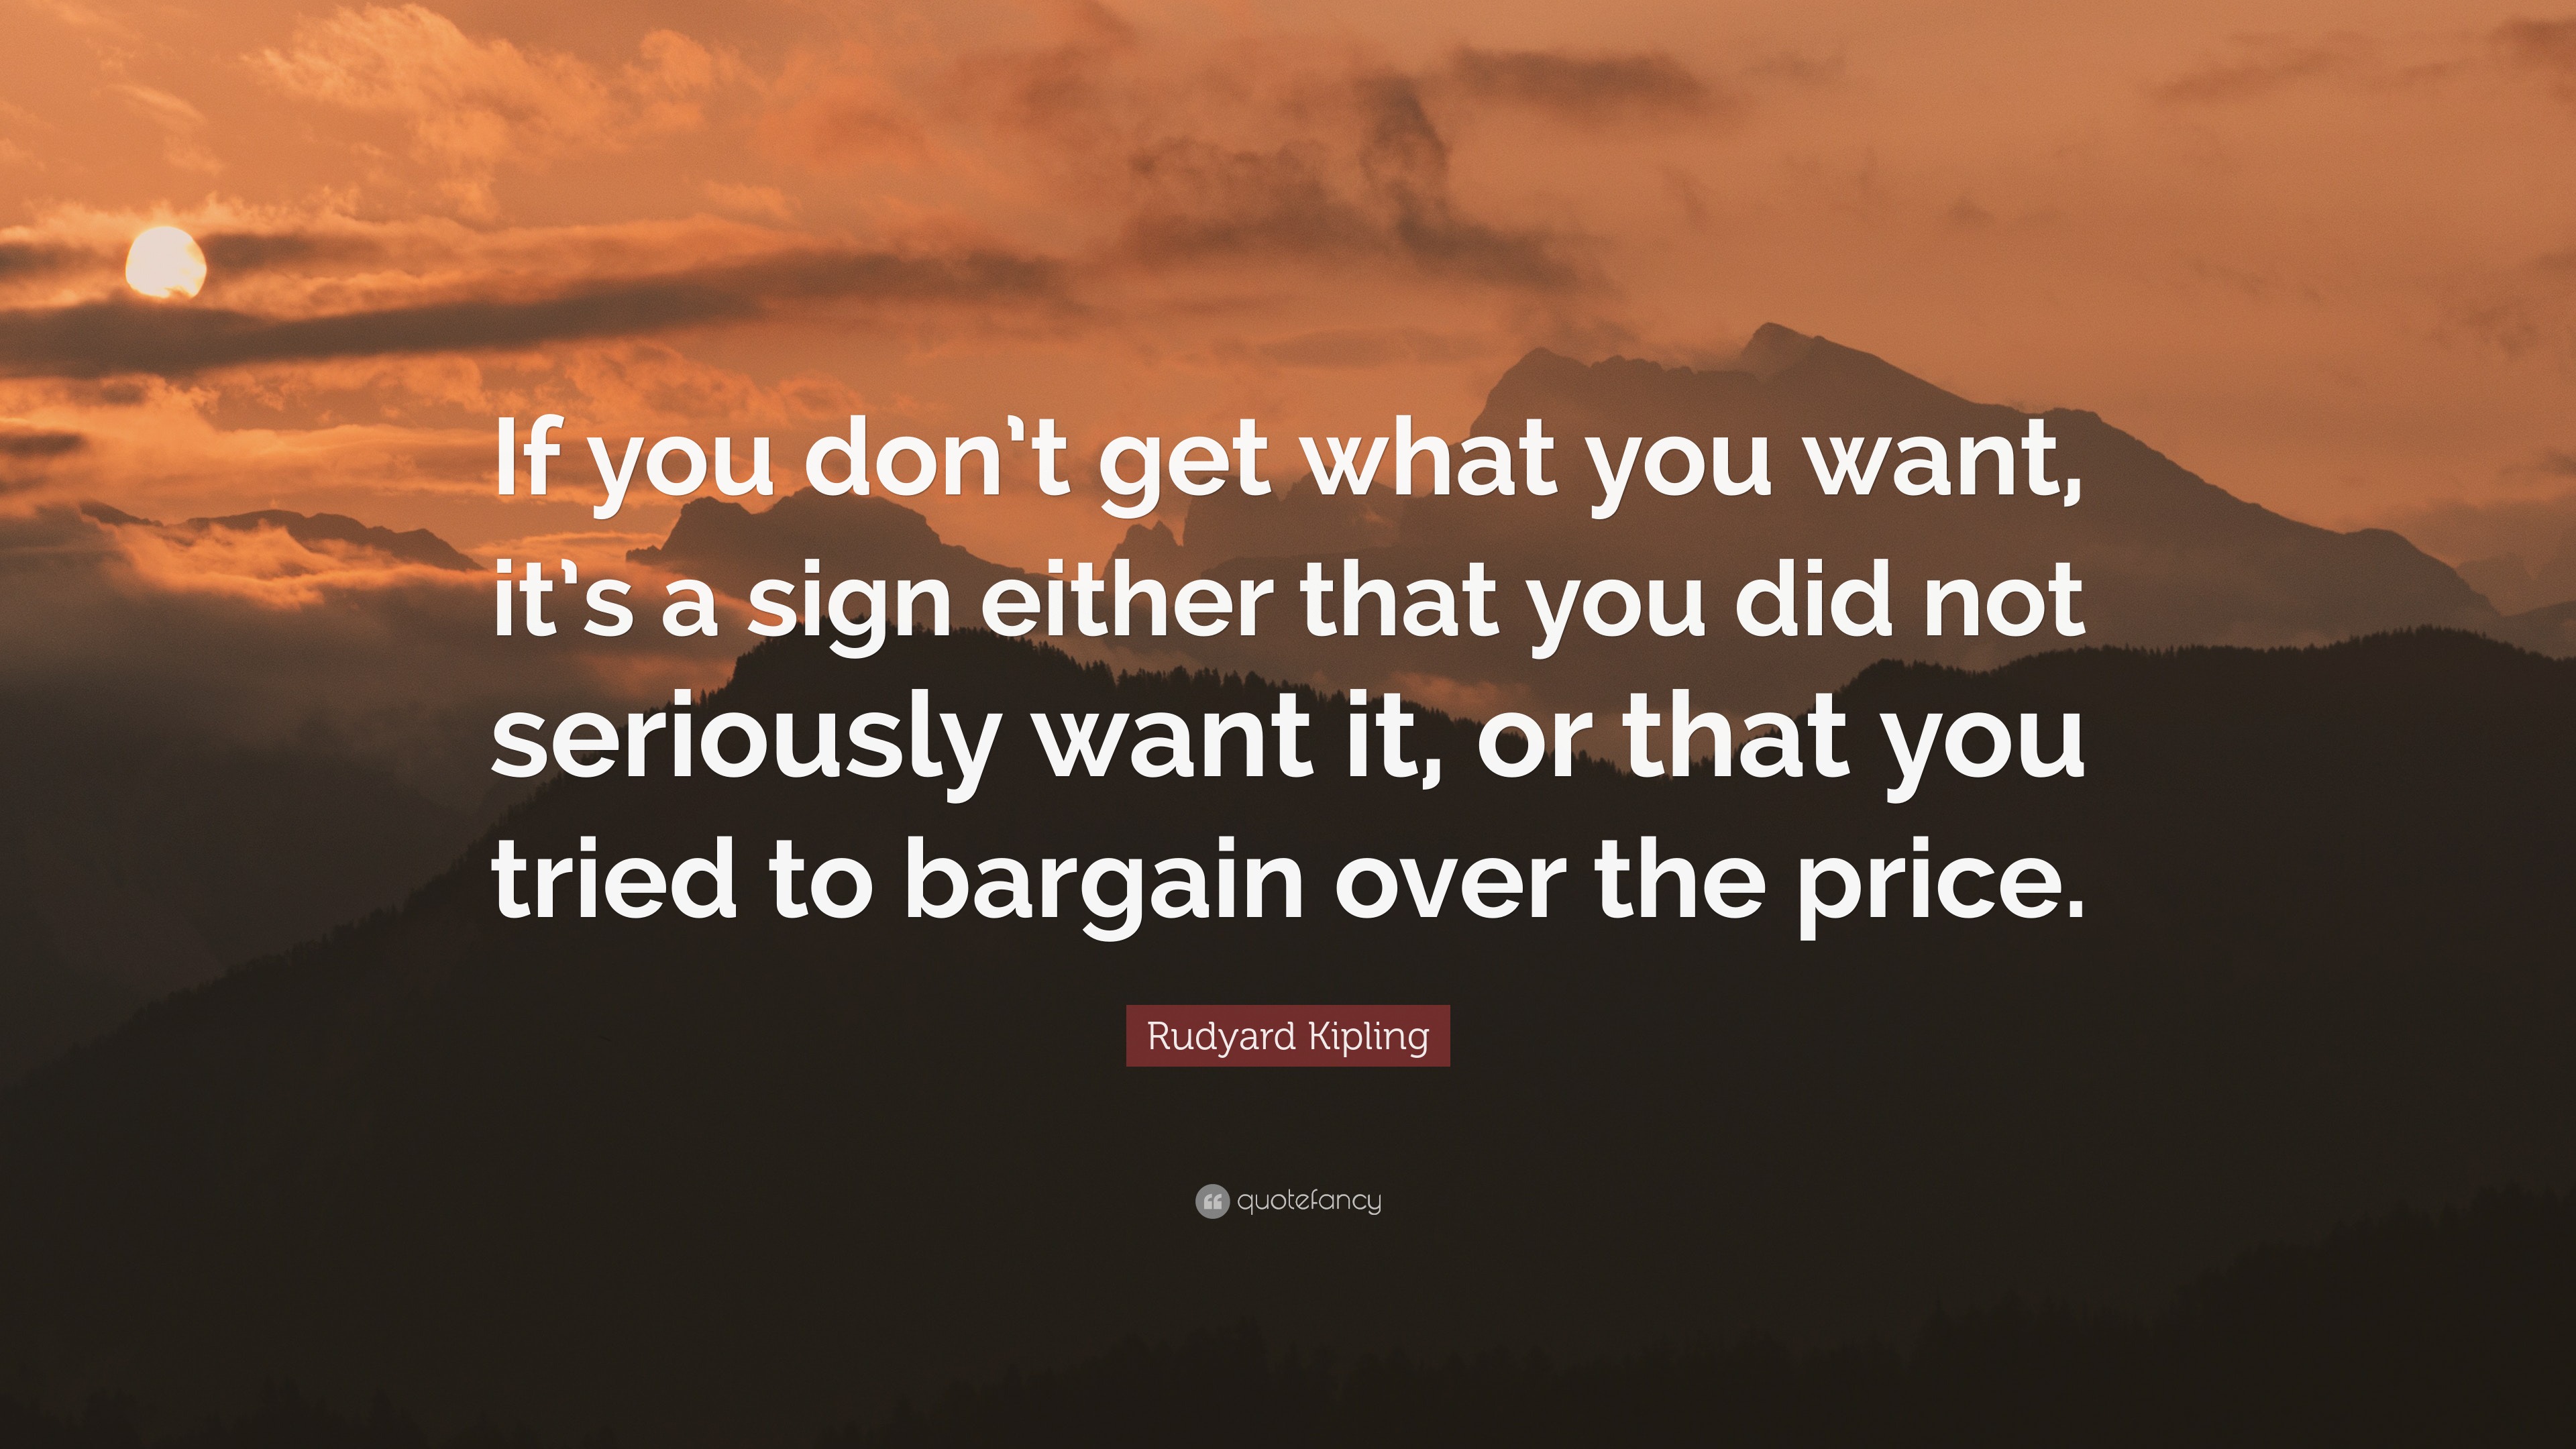 Rudyard Kipling Quote: “If you don't get what you want, it's a sign either  that you did not seriously want it, or that you tried to bargain over...”